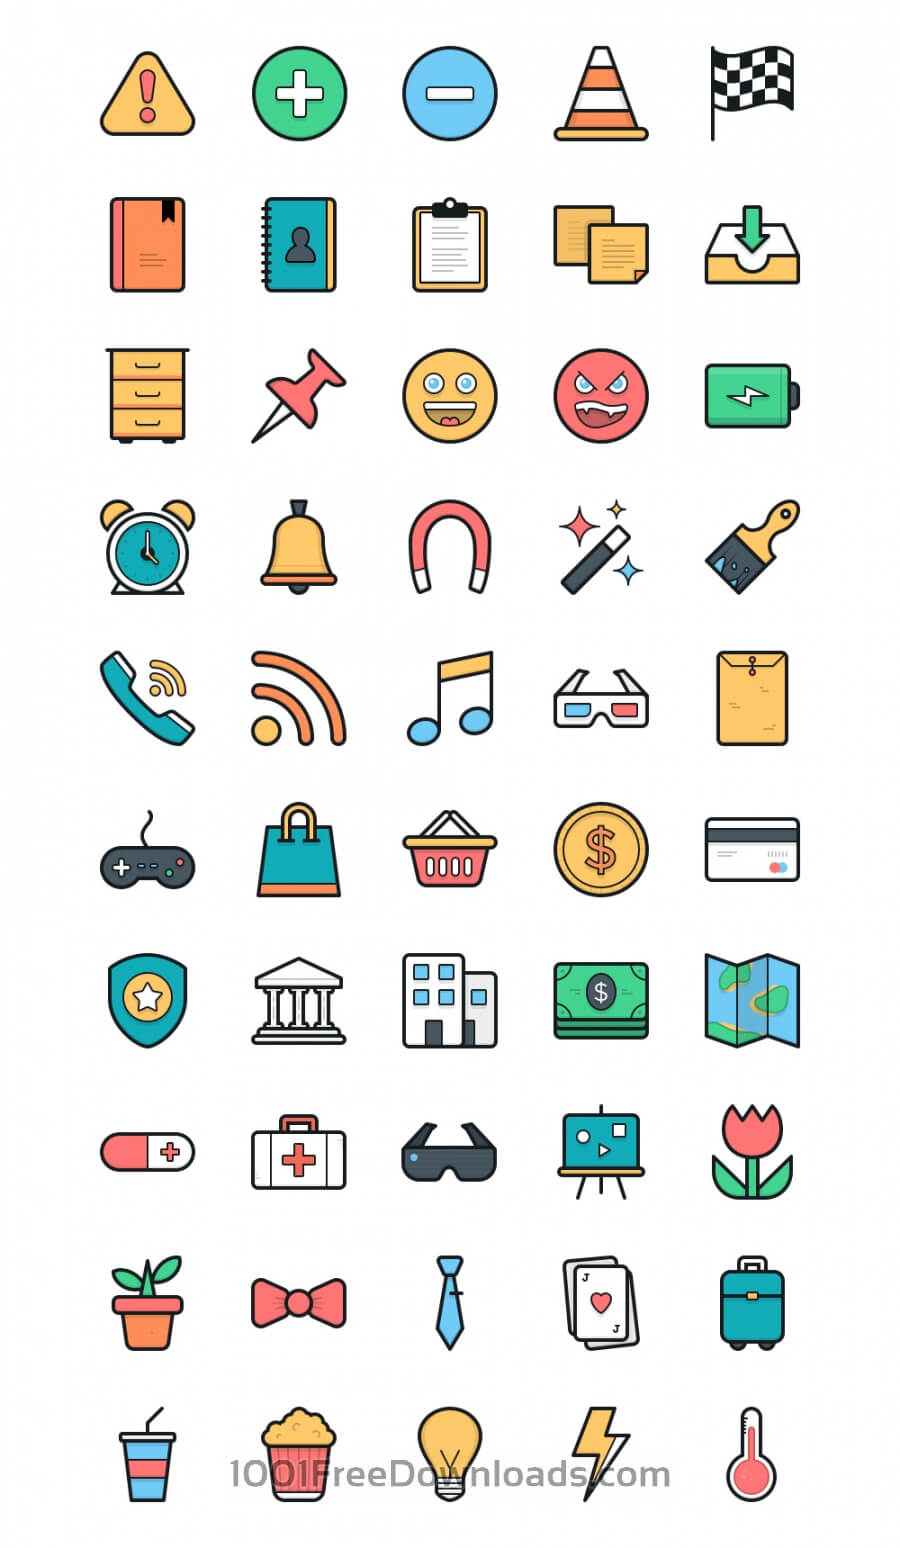 file-download-icons-1 | Design Freebies | Icon Library | Icons 